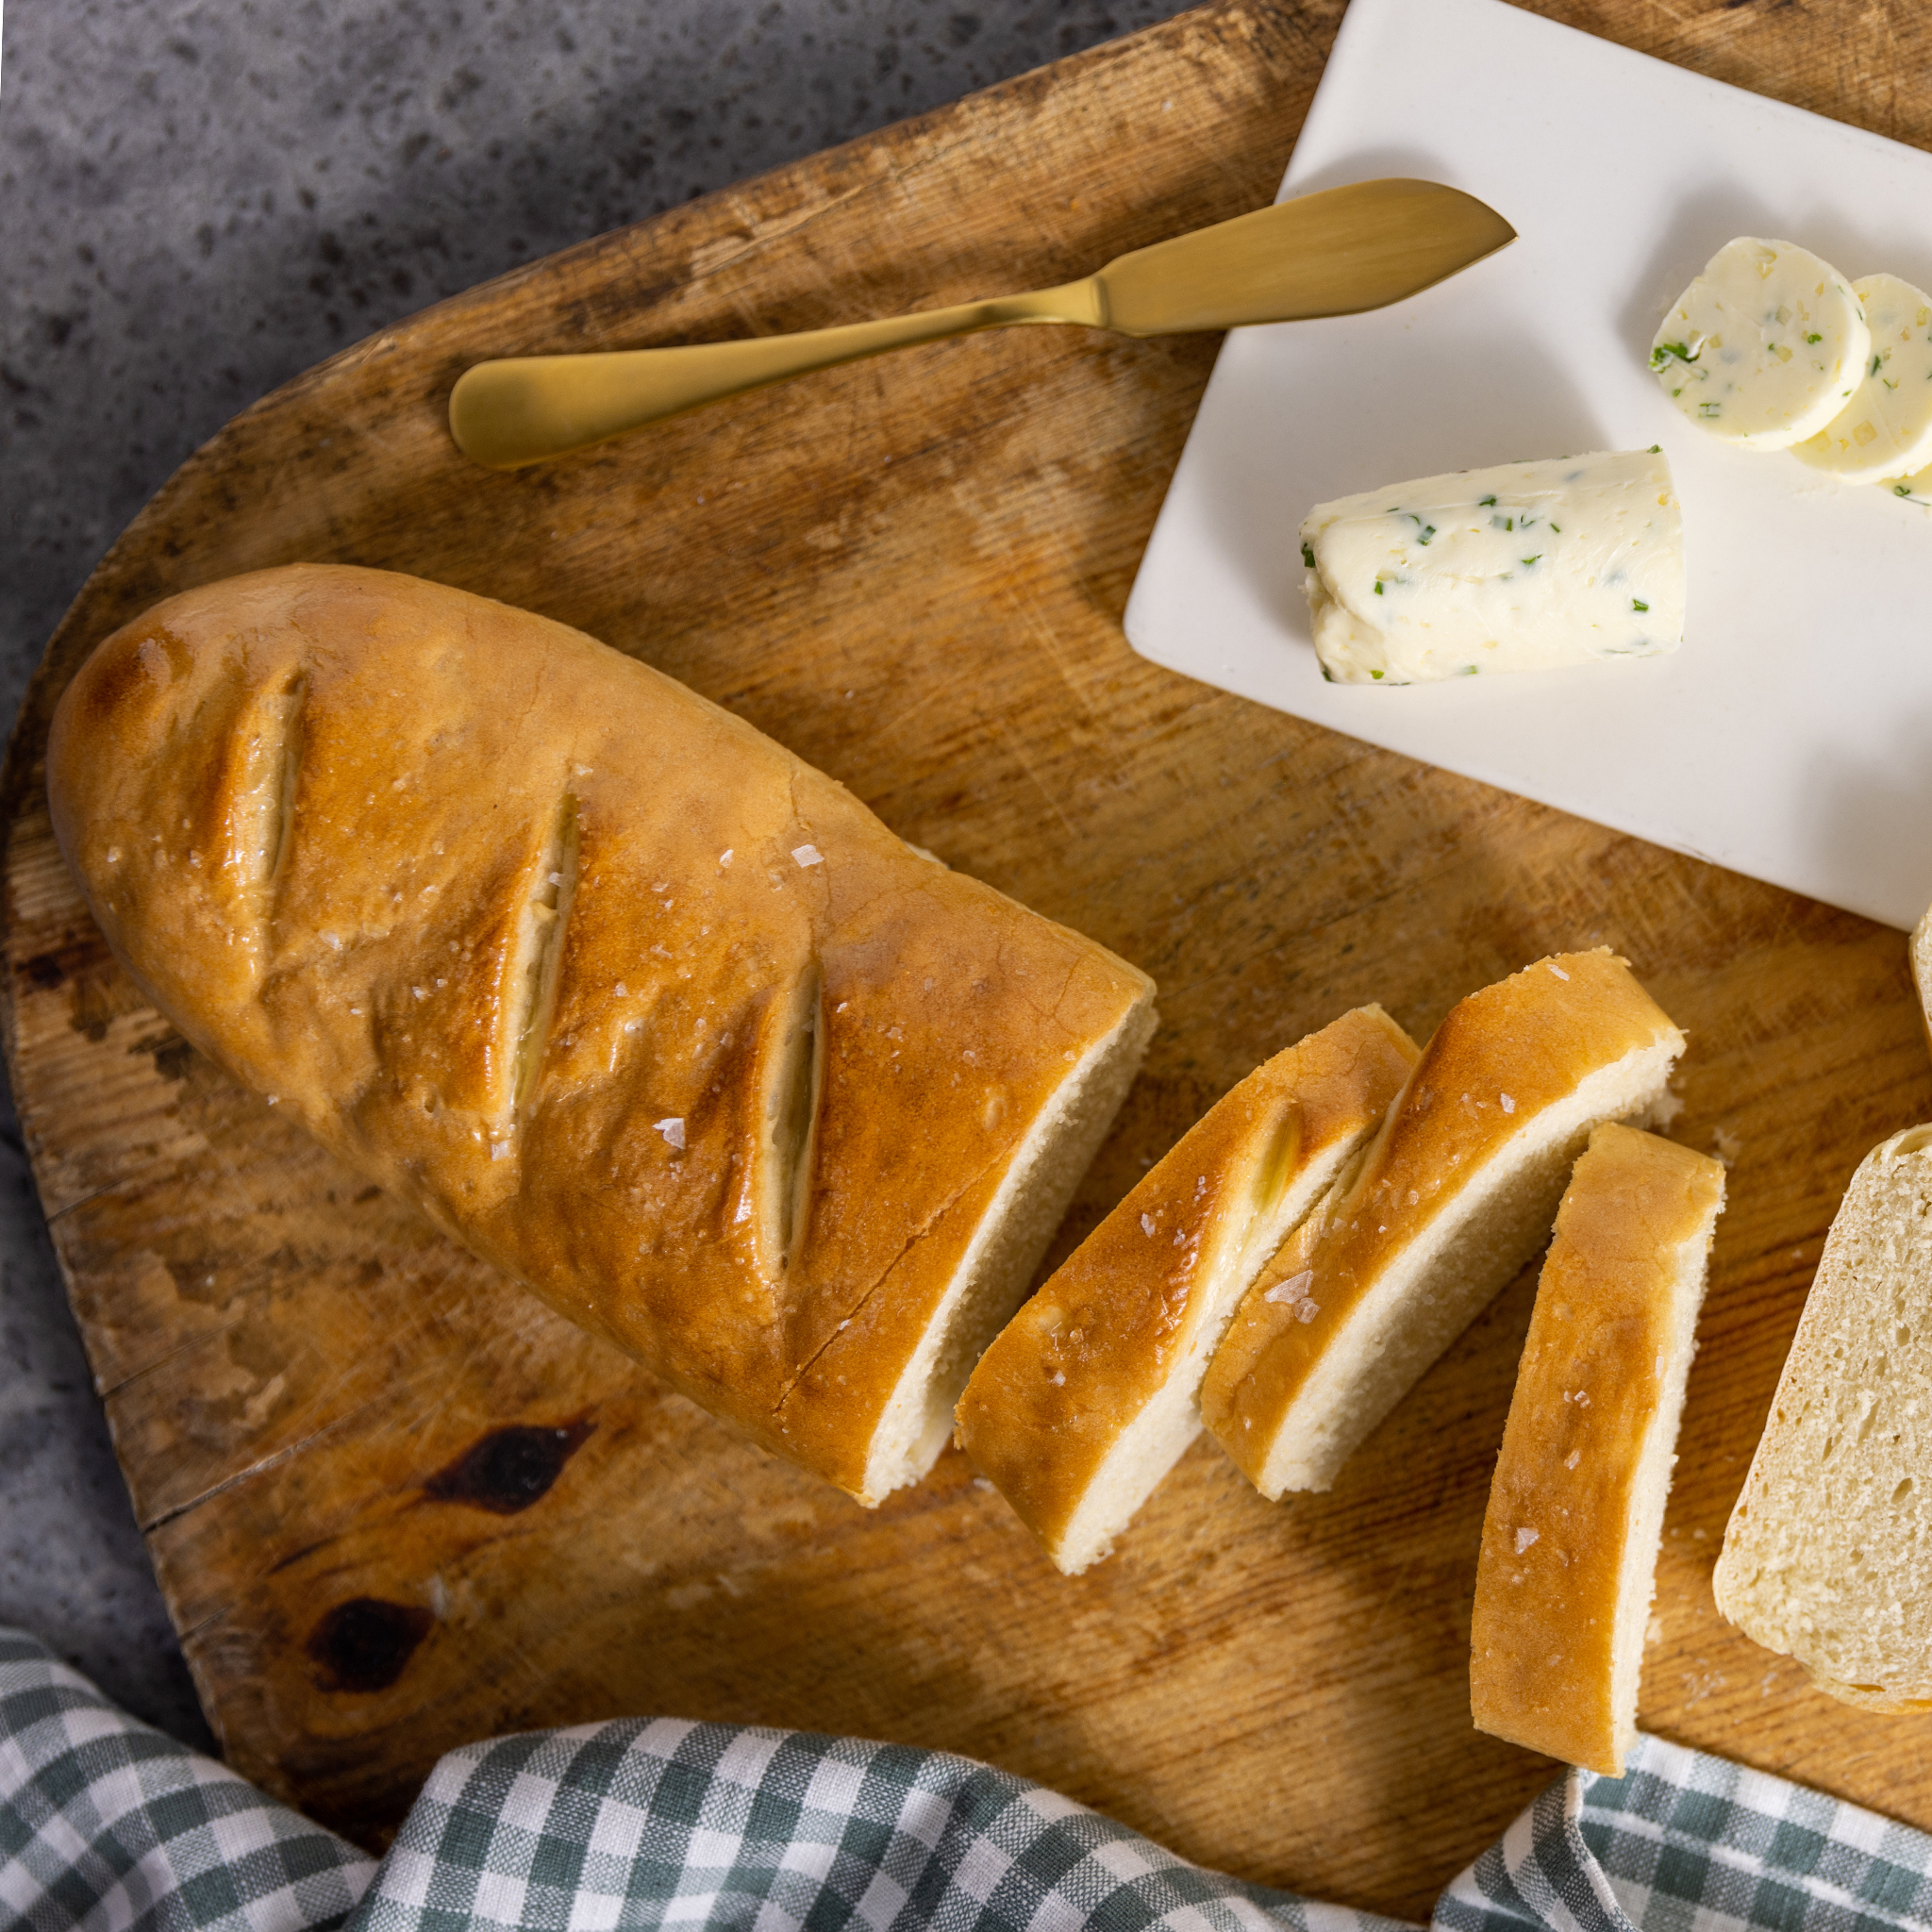 Joanna Gaines' French Bread